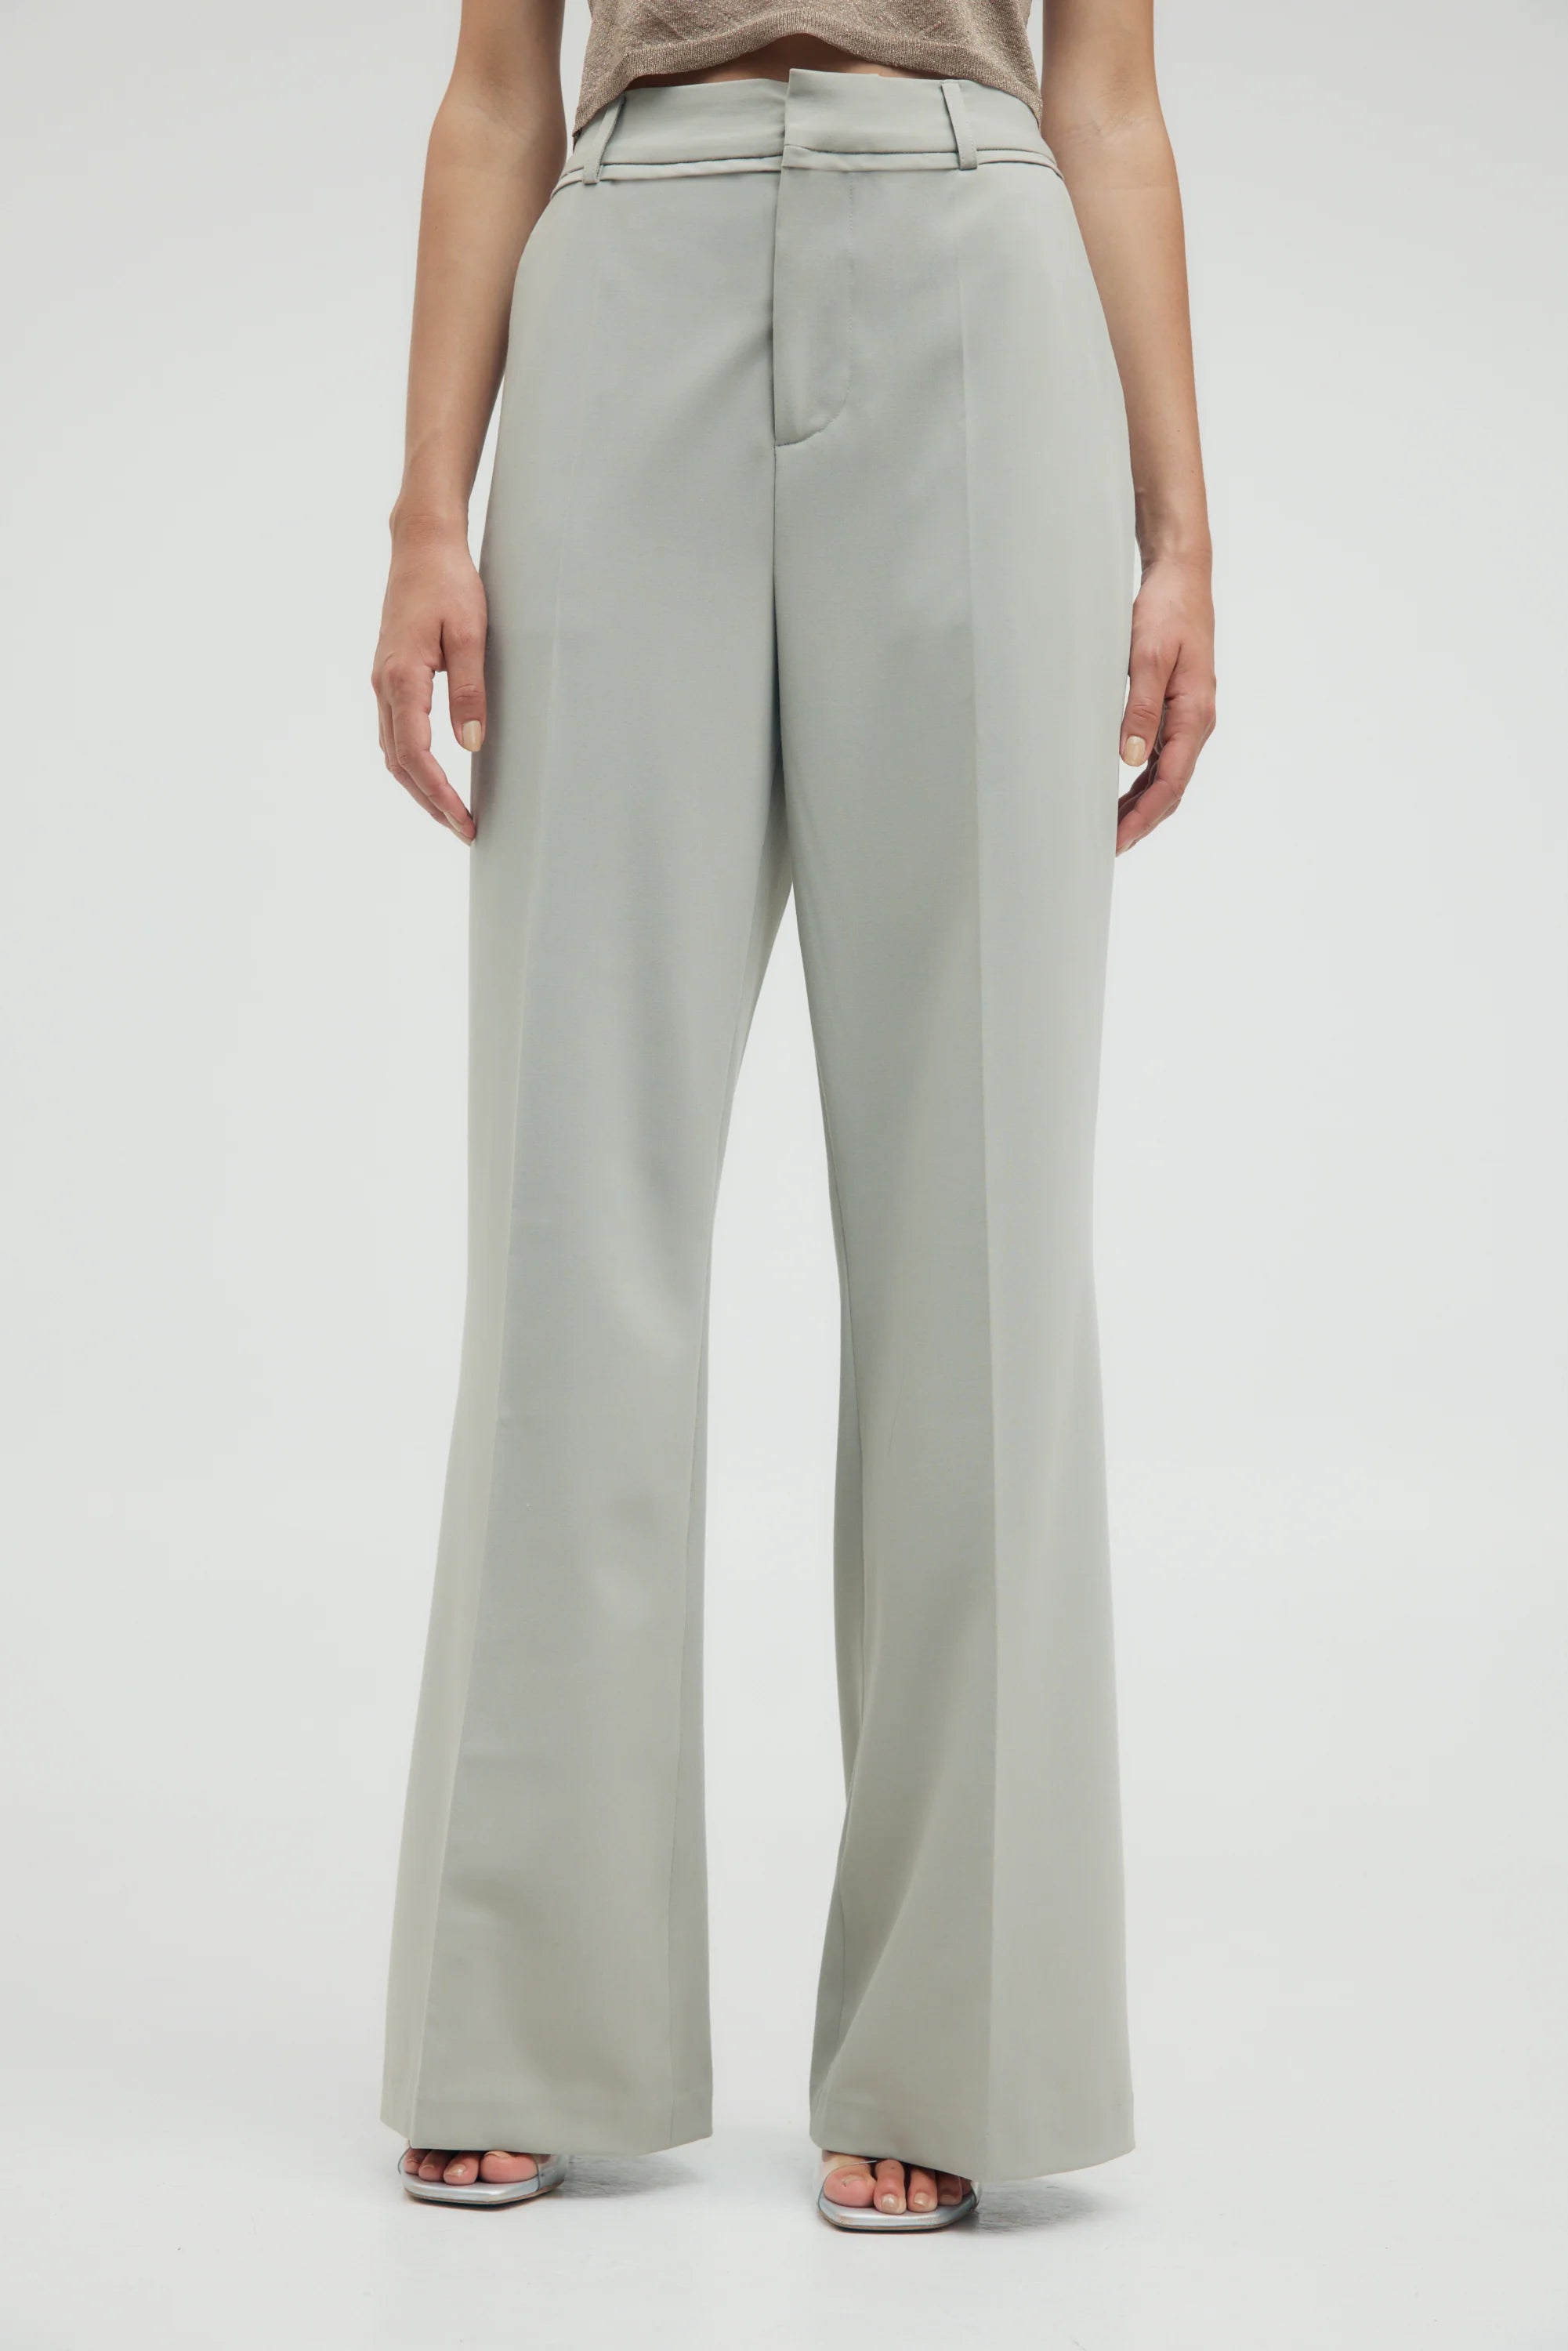 Protocol Tailored Trousers